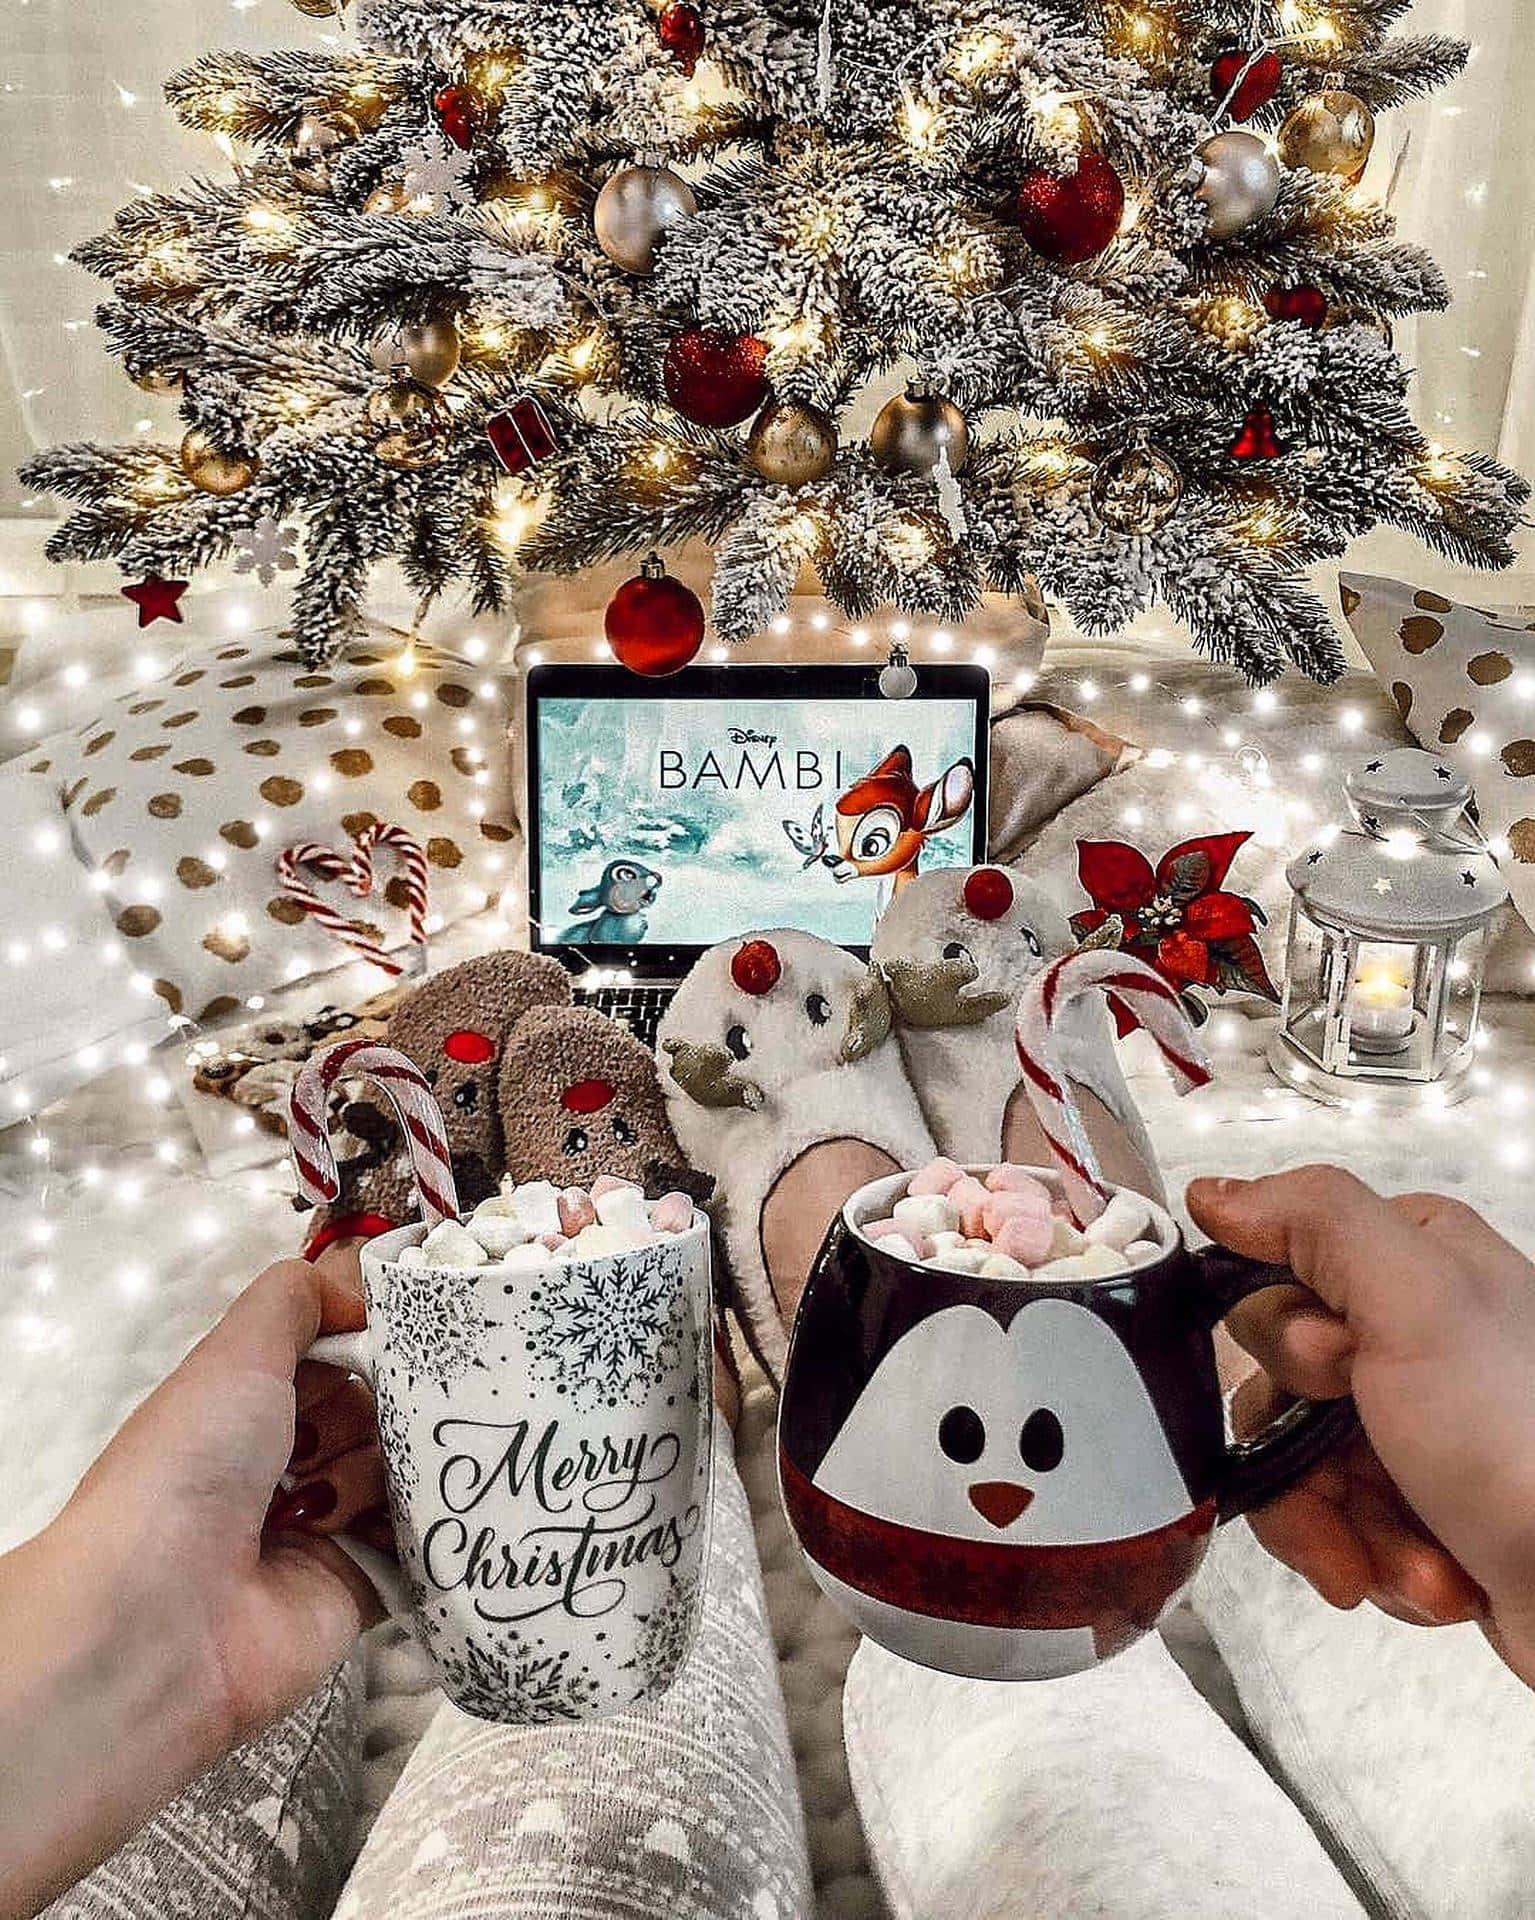 Snuggle Up And Enjoy The Coziest Of Christmas Celebrations Wallpaper